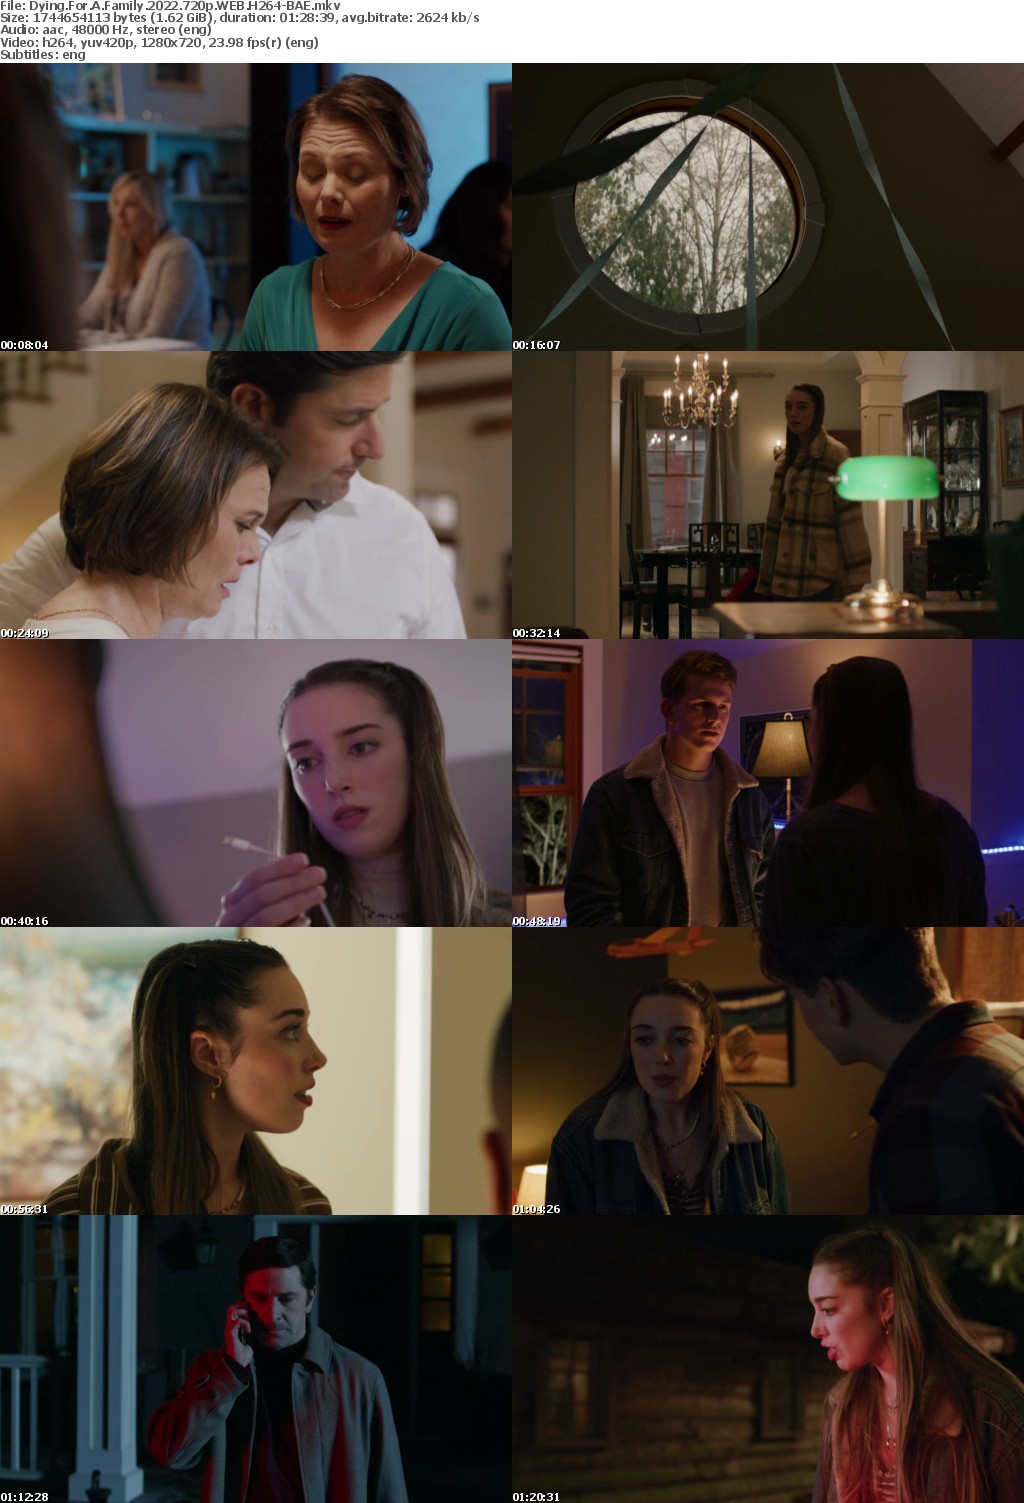 Dying For A Family 2022 720p WEB H264-BAE